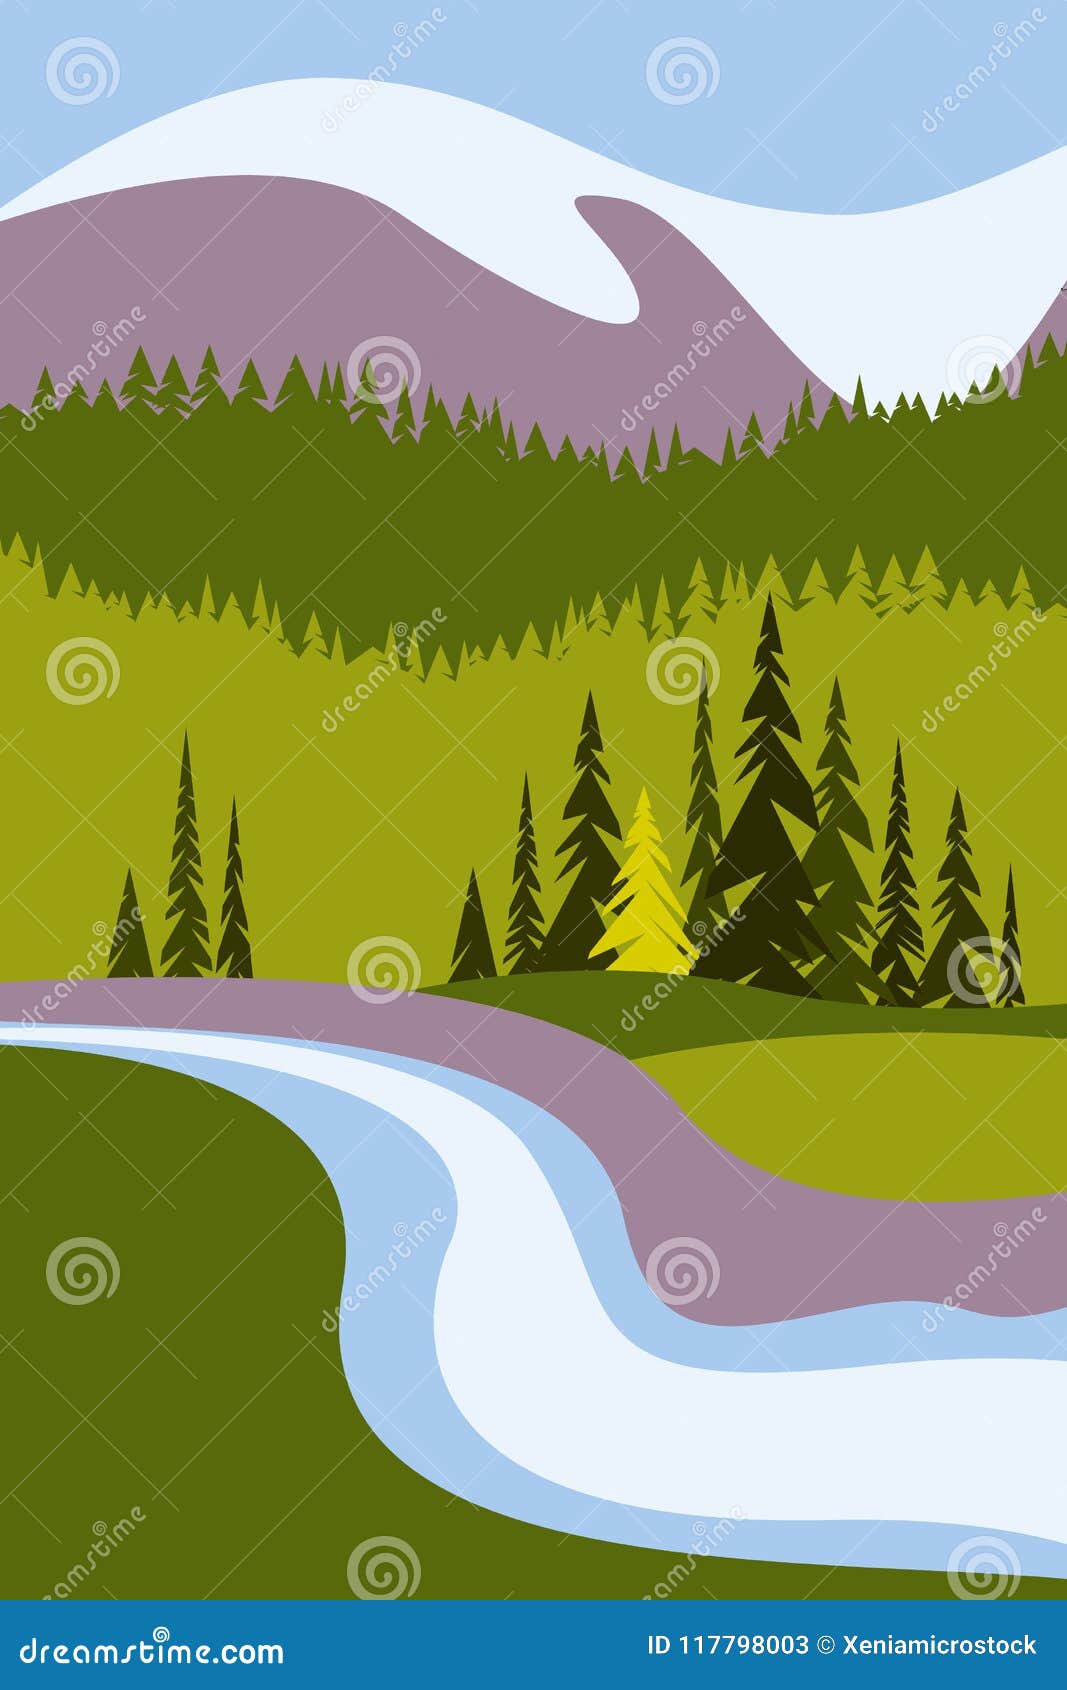 landscape with mountains and snowy peaks, a river and trees. poster for tourism with the natural environment, national parks, clea